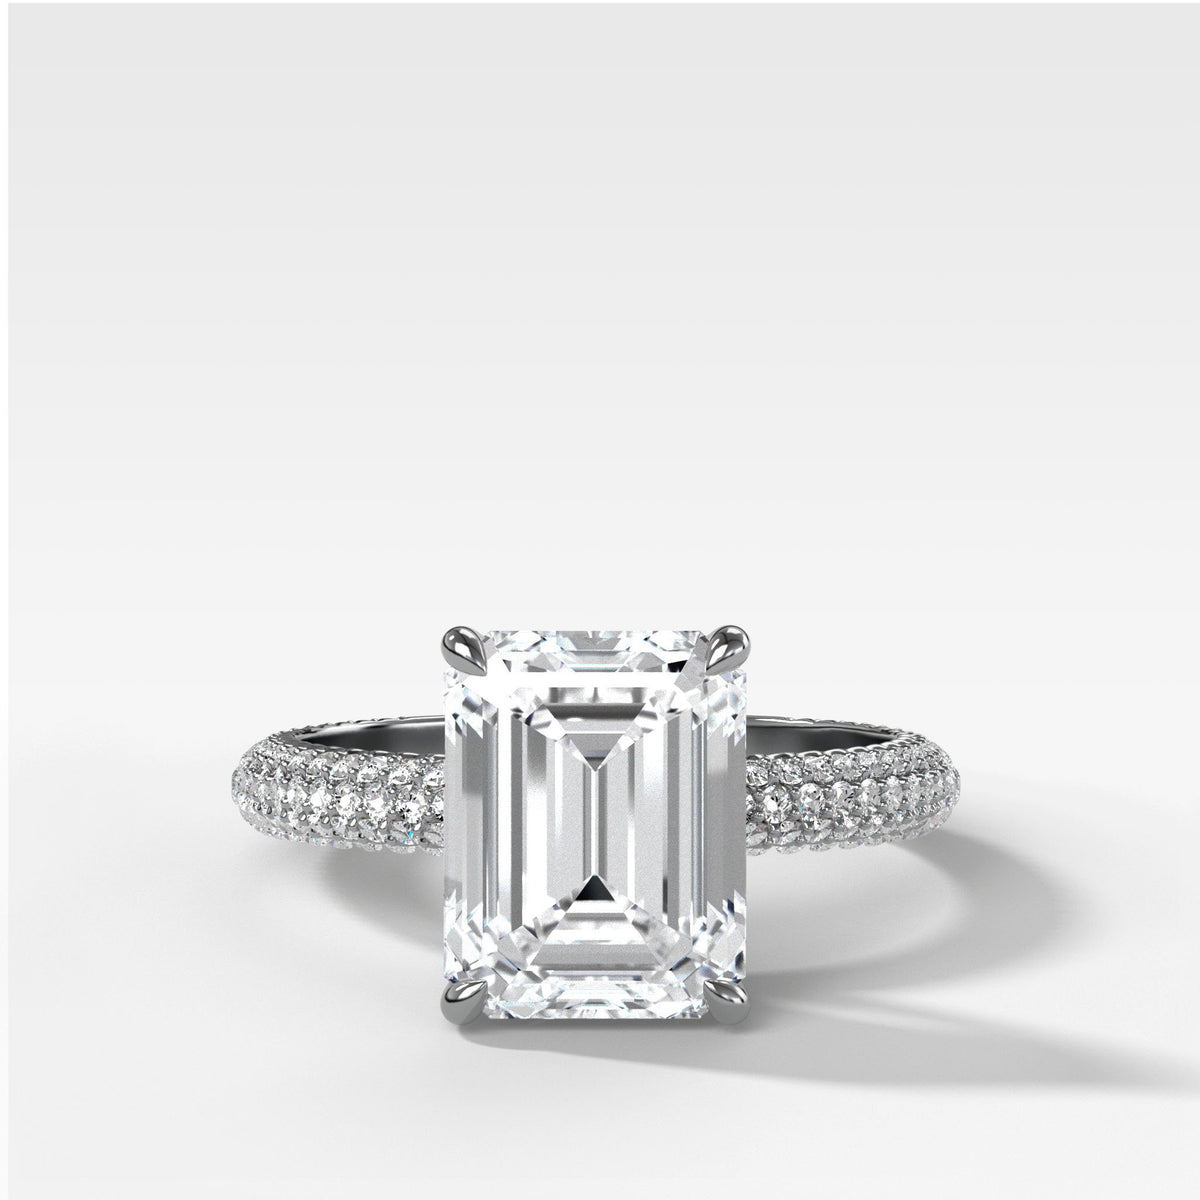 Triple Row Pave Engagement Ring by Good Stone in White Gold